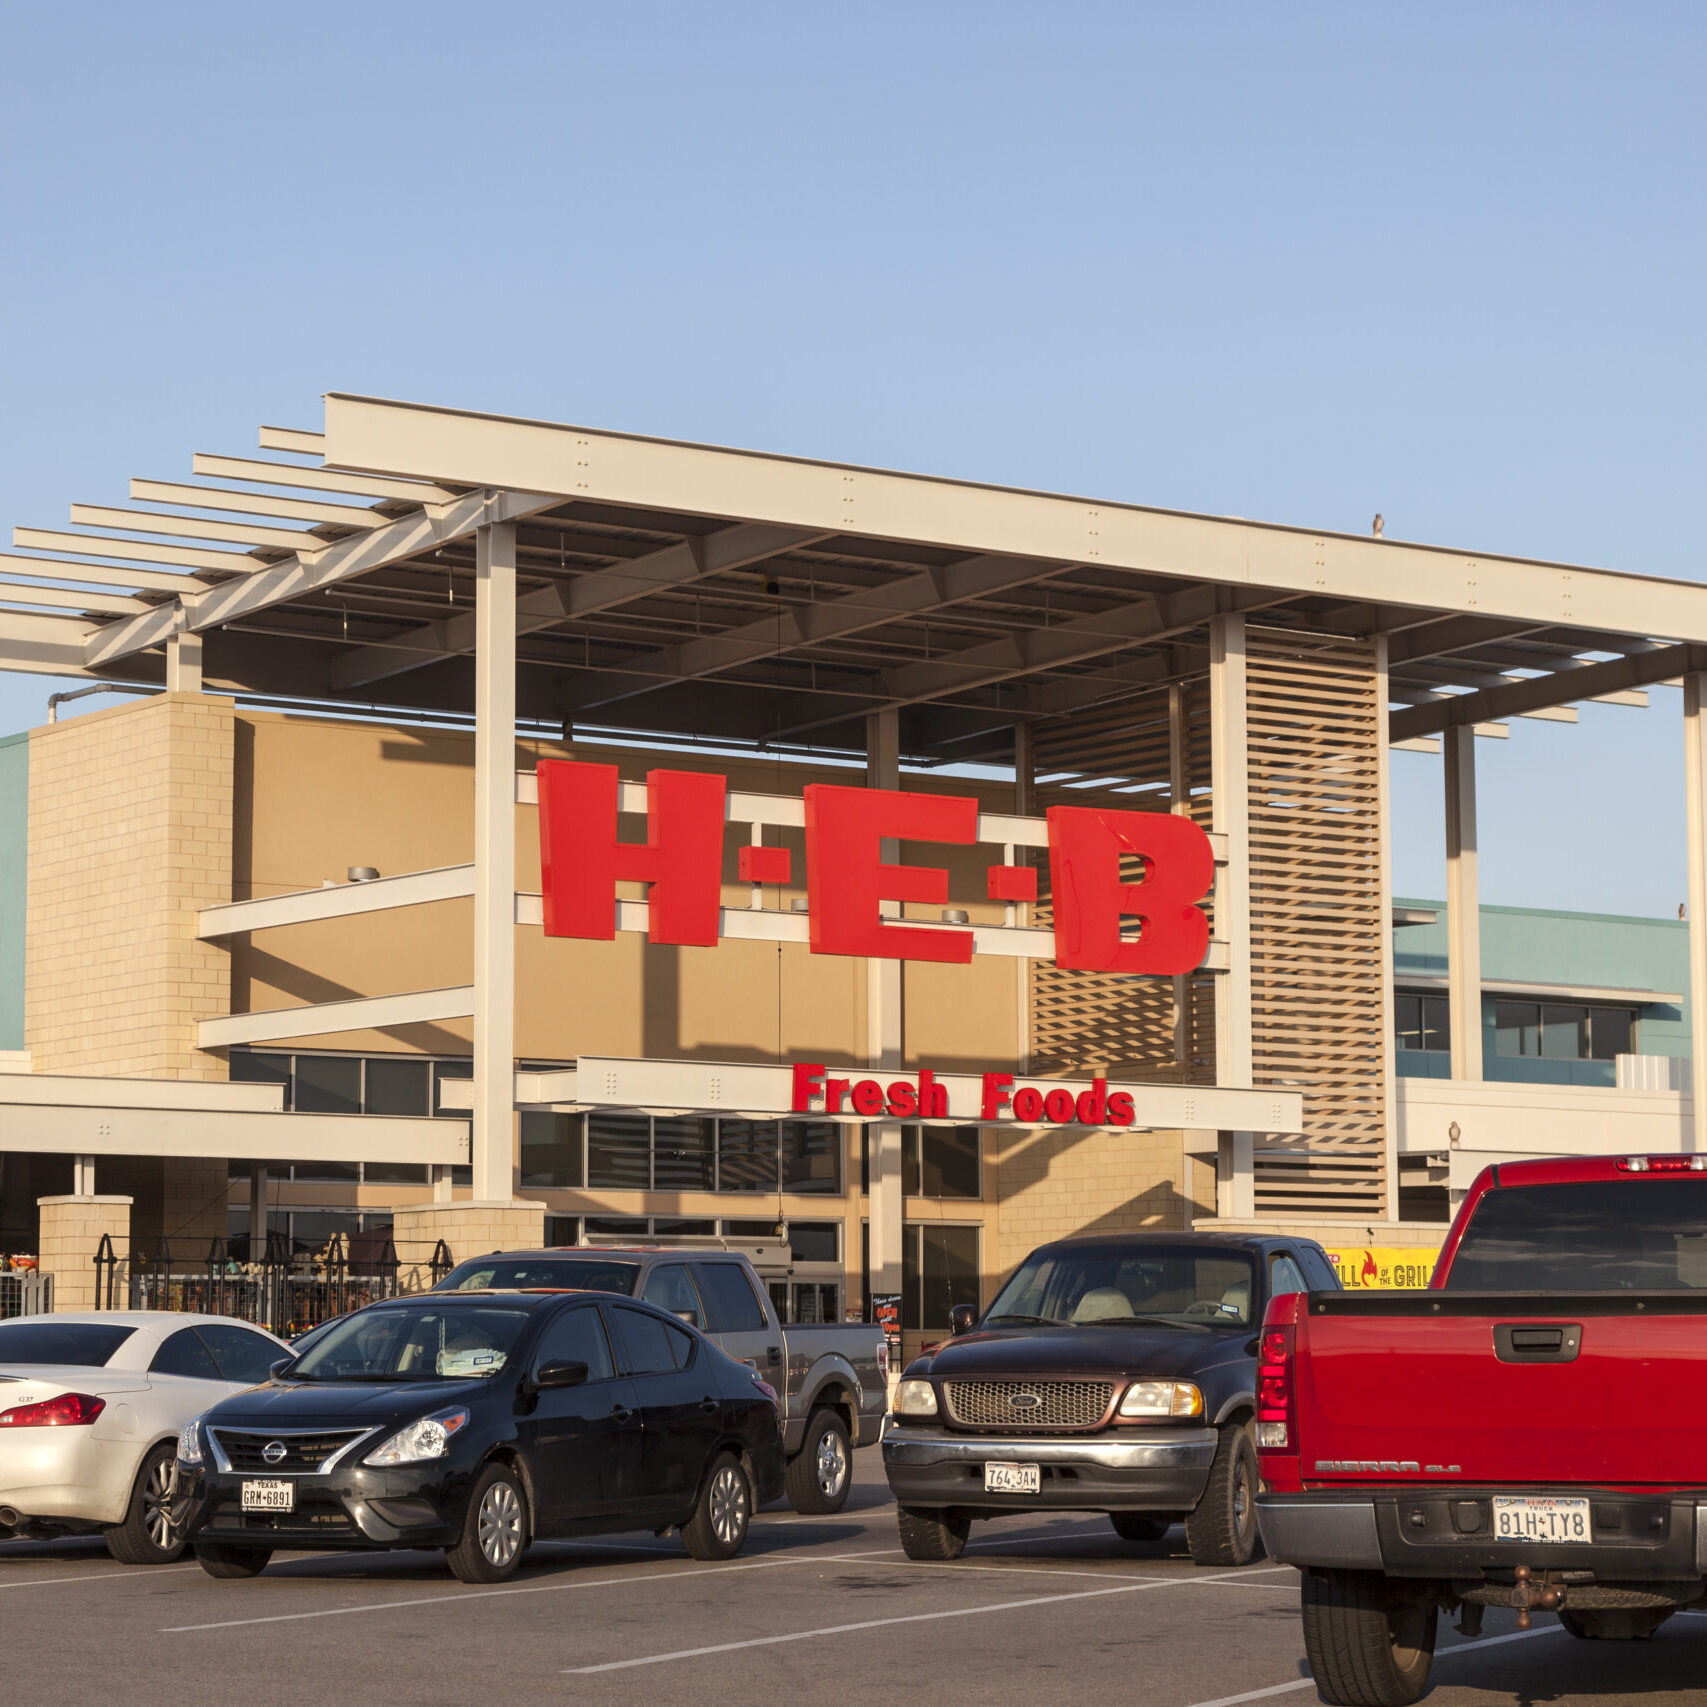 Houston, Tx, USA - April 14, 2016: HEB - Here Everything's Better - Grocery store in the city of Houston. HEB is an American supermarket chain based in San Antonio, Texas